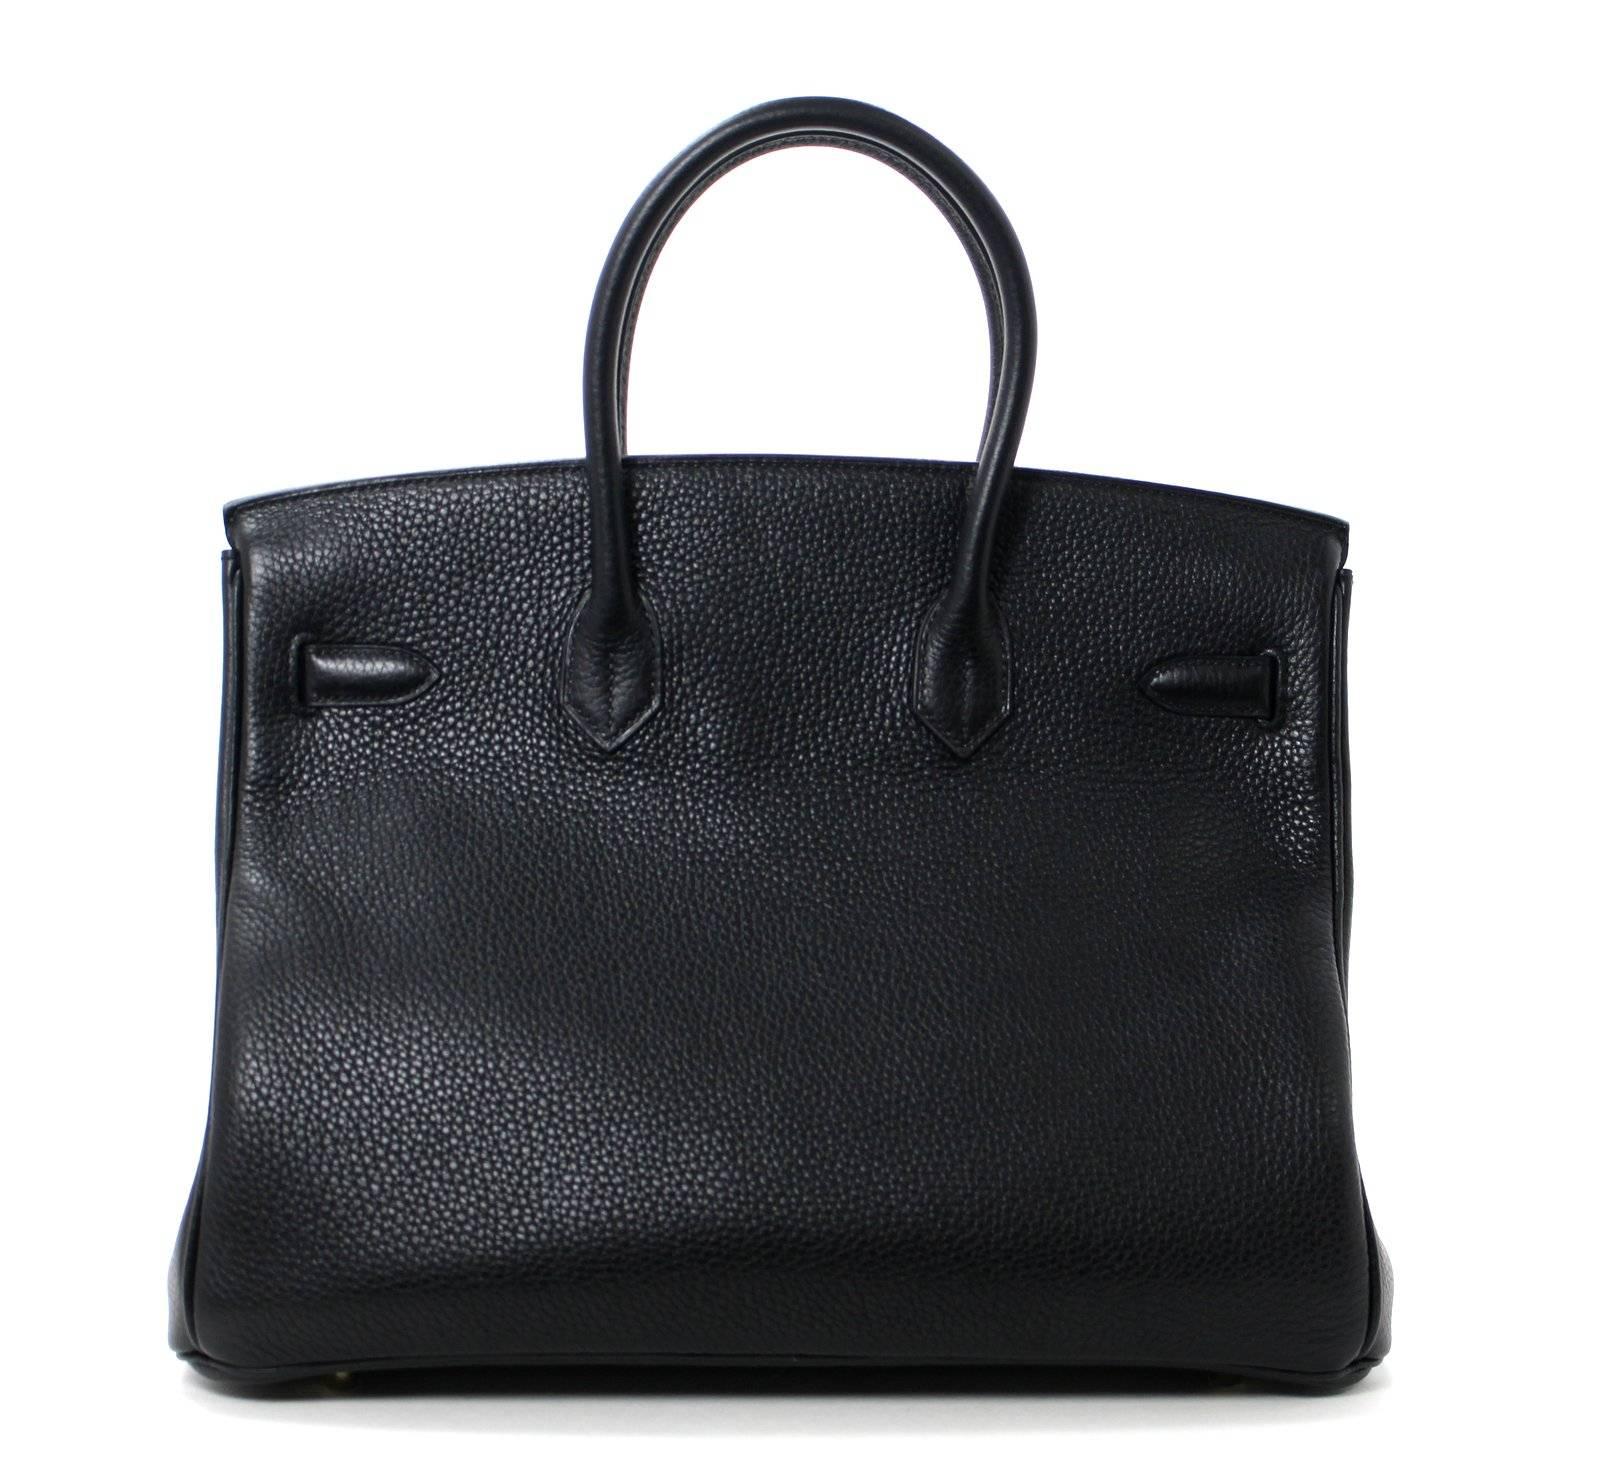 Pristine, store fresh condition (plastic on hardware) Hermès Birkin Bag in BLACK Togo Leather, GHW 35 cm, T stamp

Purchase includes padlock, keys, clochette, protective felt, raincoat, dust bags and Hermès box with tissue. 
Crafted by hand and